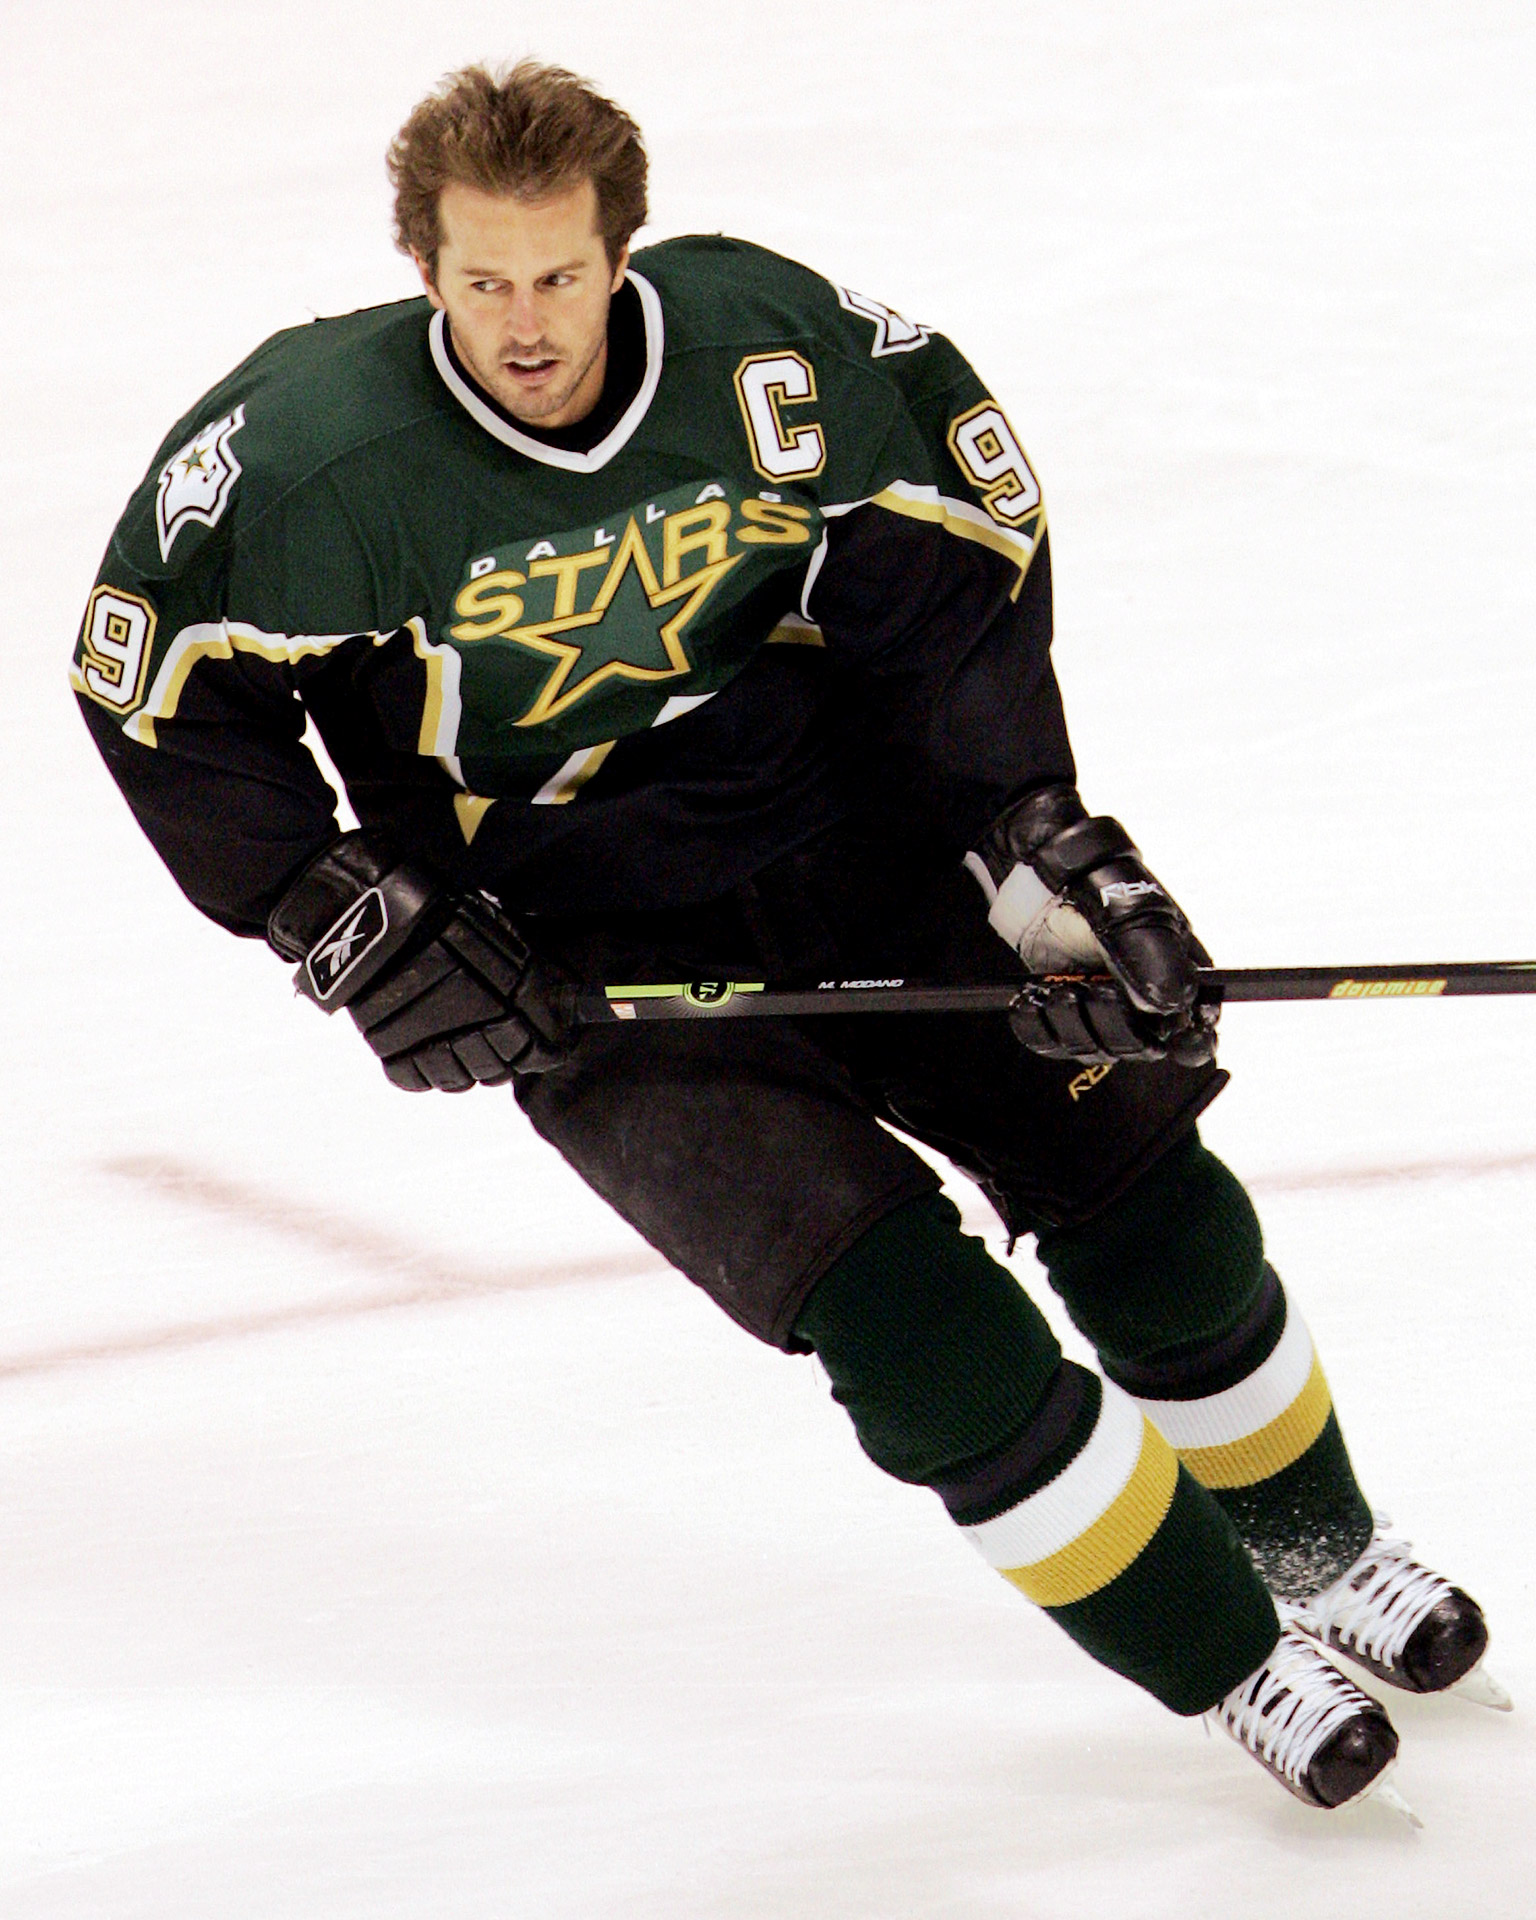 Mike Modano of the Minnesota North Stars skates on the ice as he